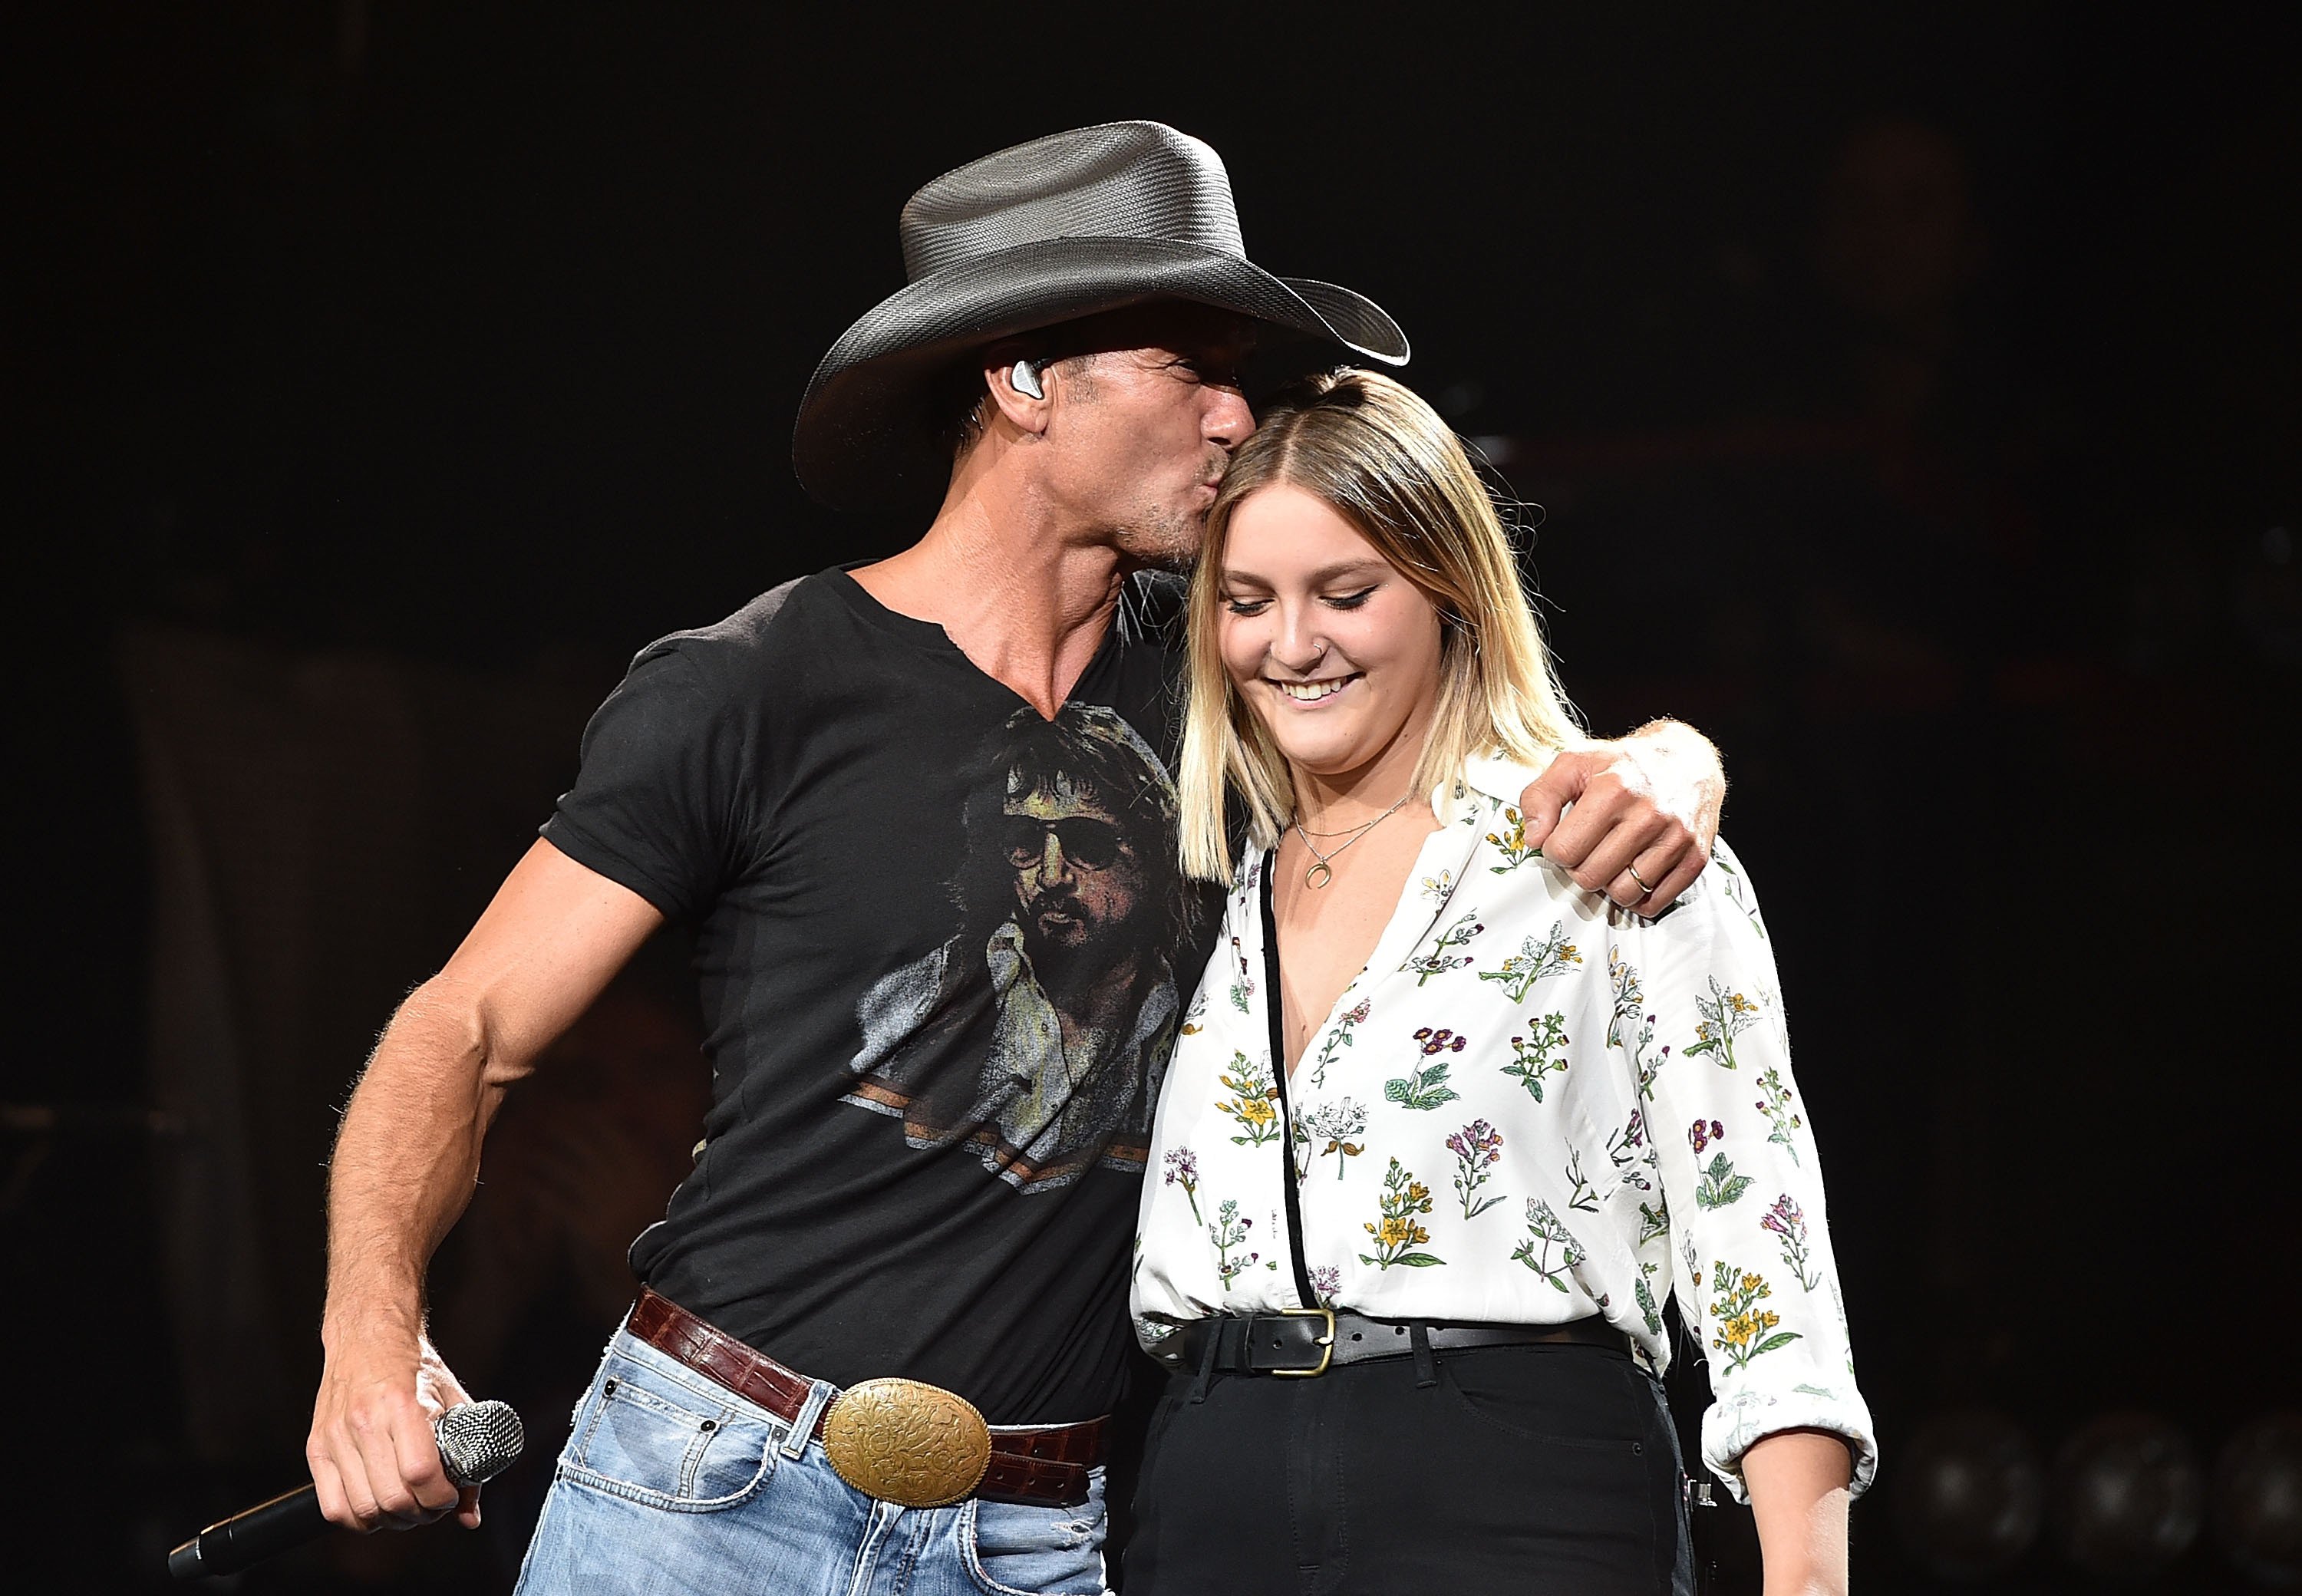 Gracie McGraw with her dad Tim McGraw at Bridgestone Arena on August 15, 2015 in Nashville, Tennessee | Source: Getty Images